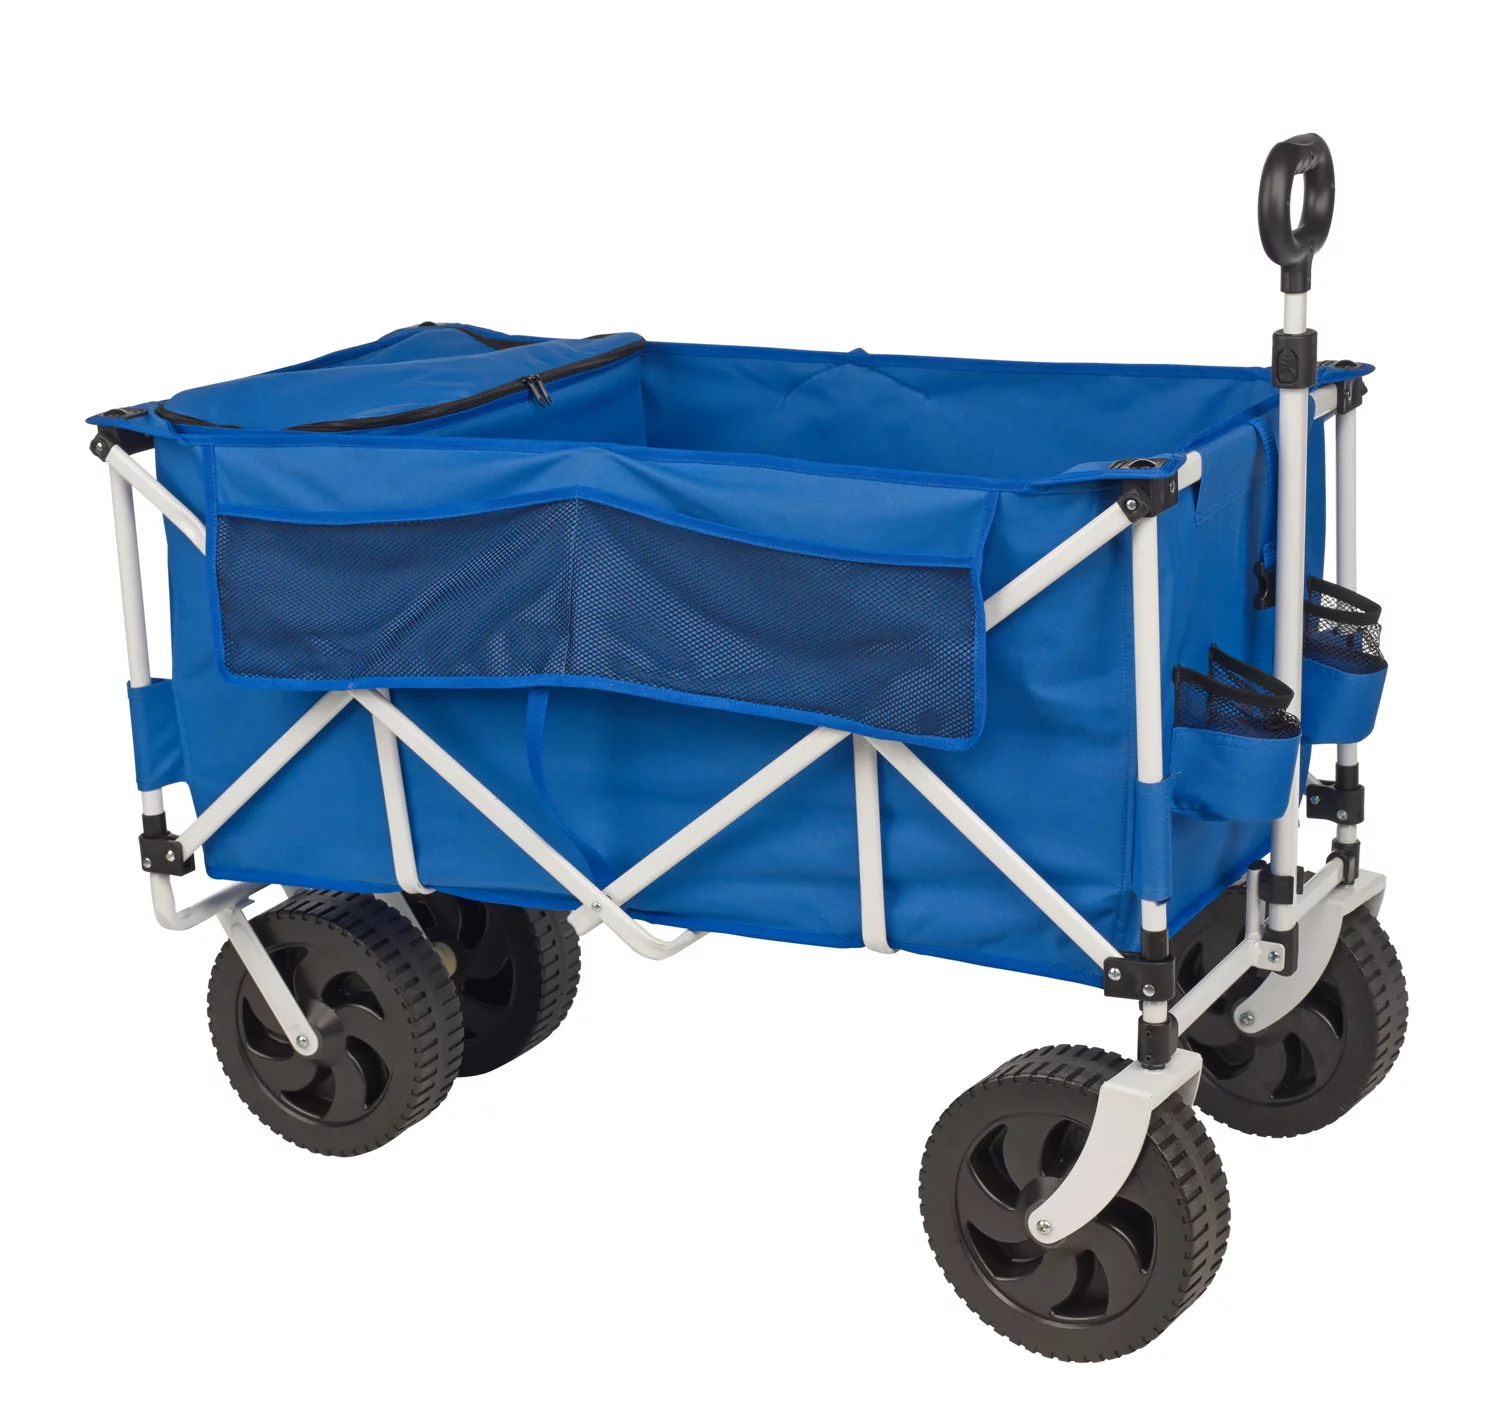 What are some good foldable carts with wheels?